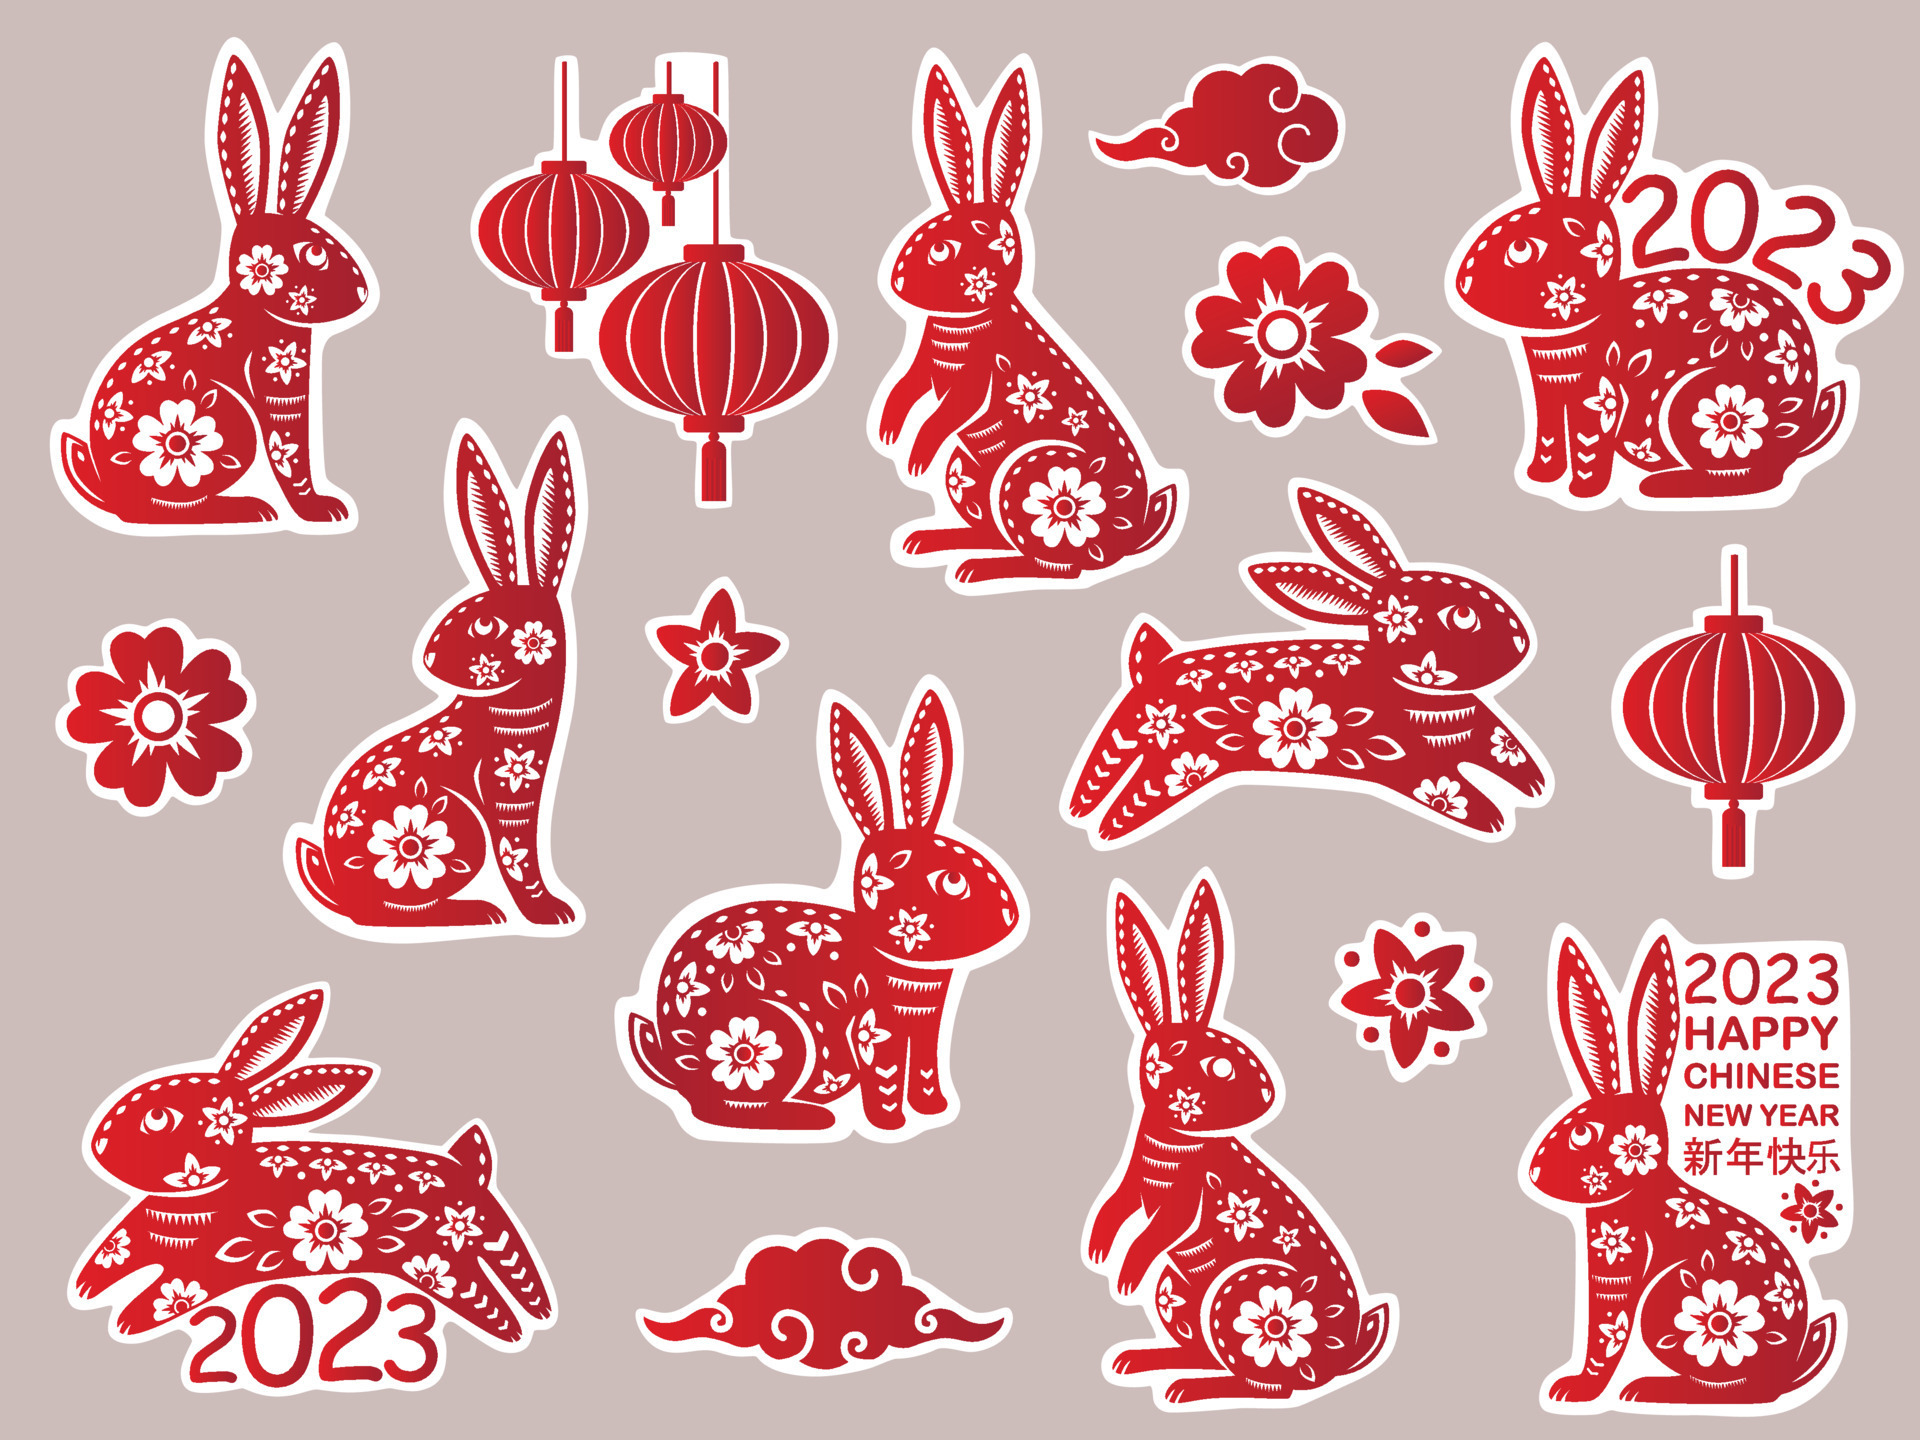 Chinese new year stickers stock vector. Illustration of holiday